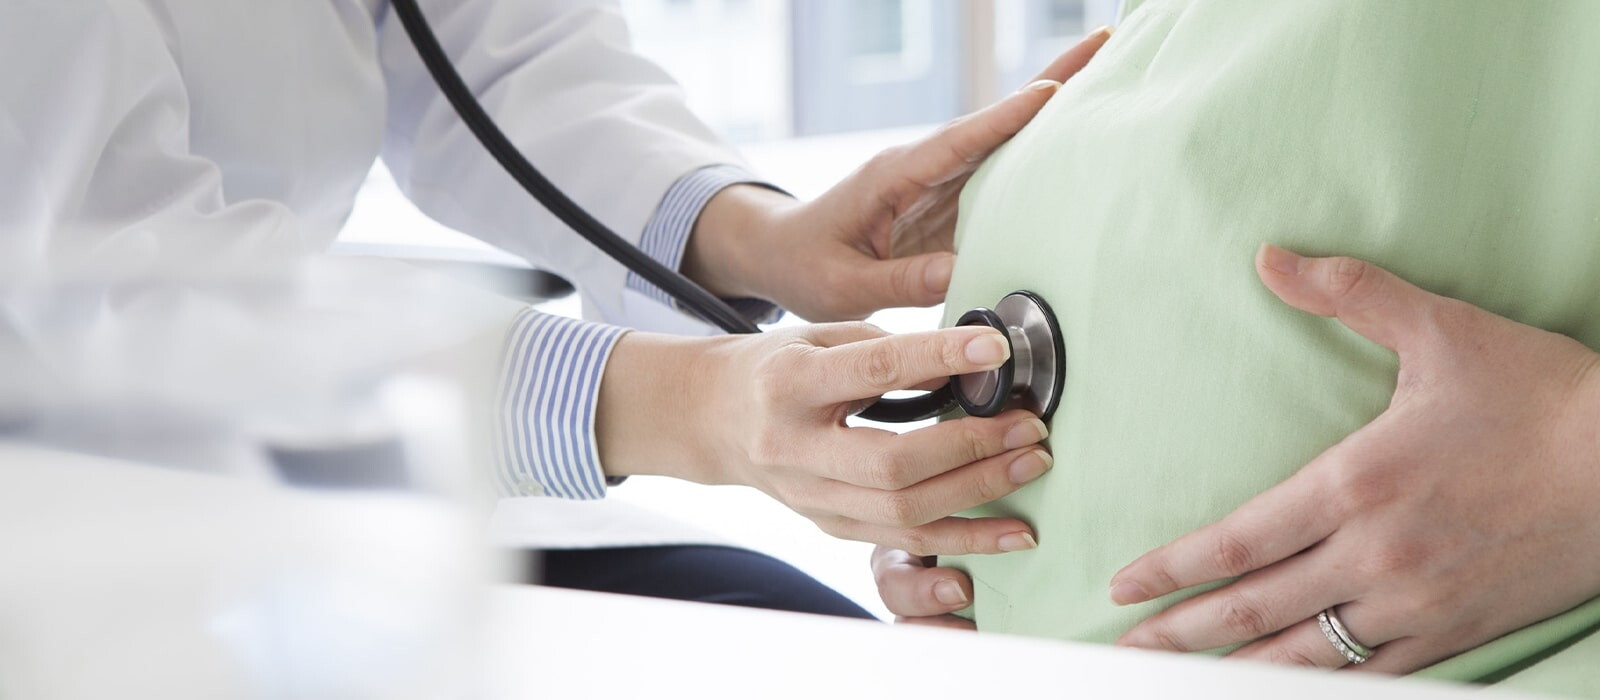 10 essential questions about gestational diabetes answered